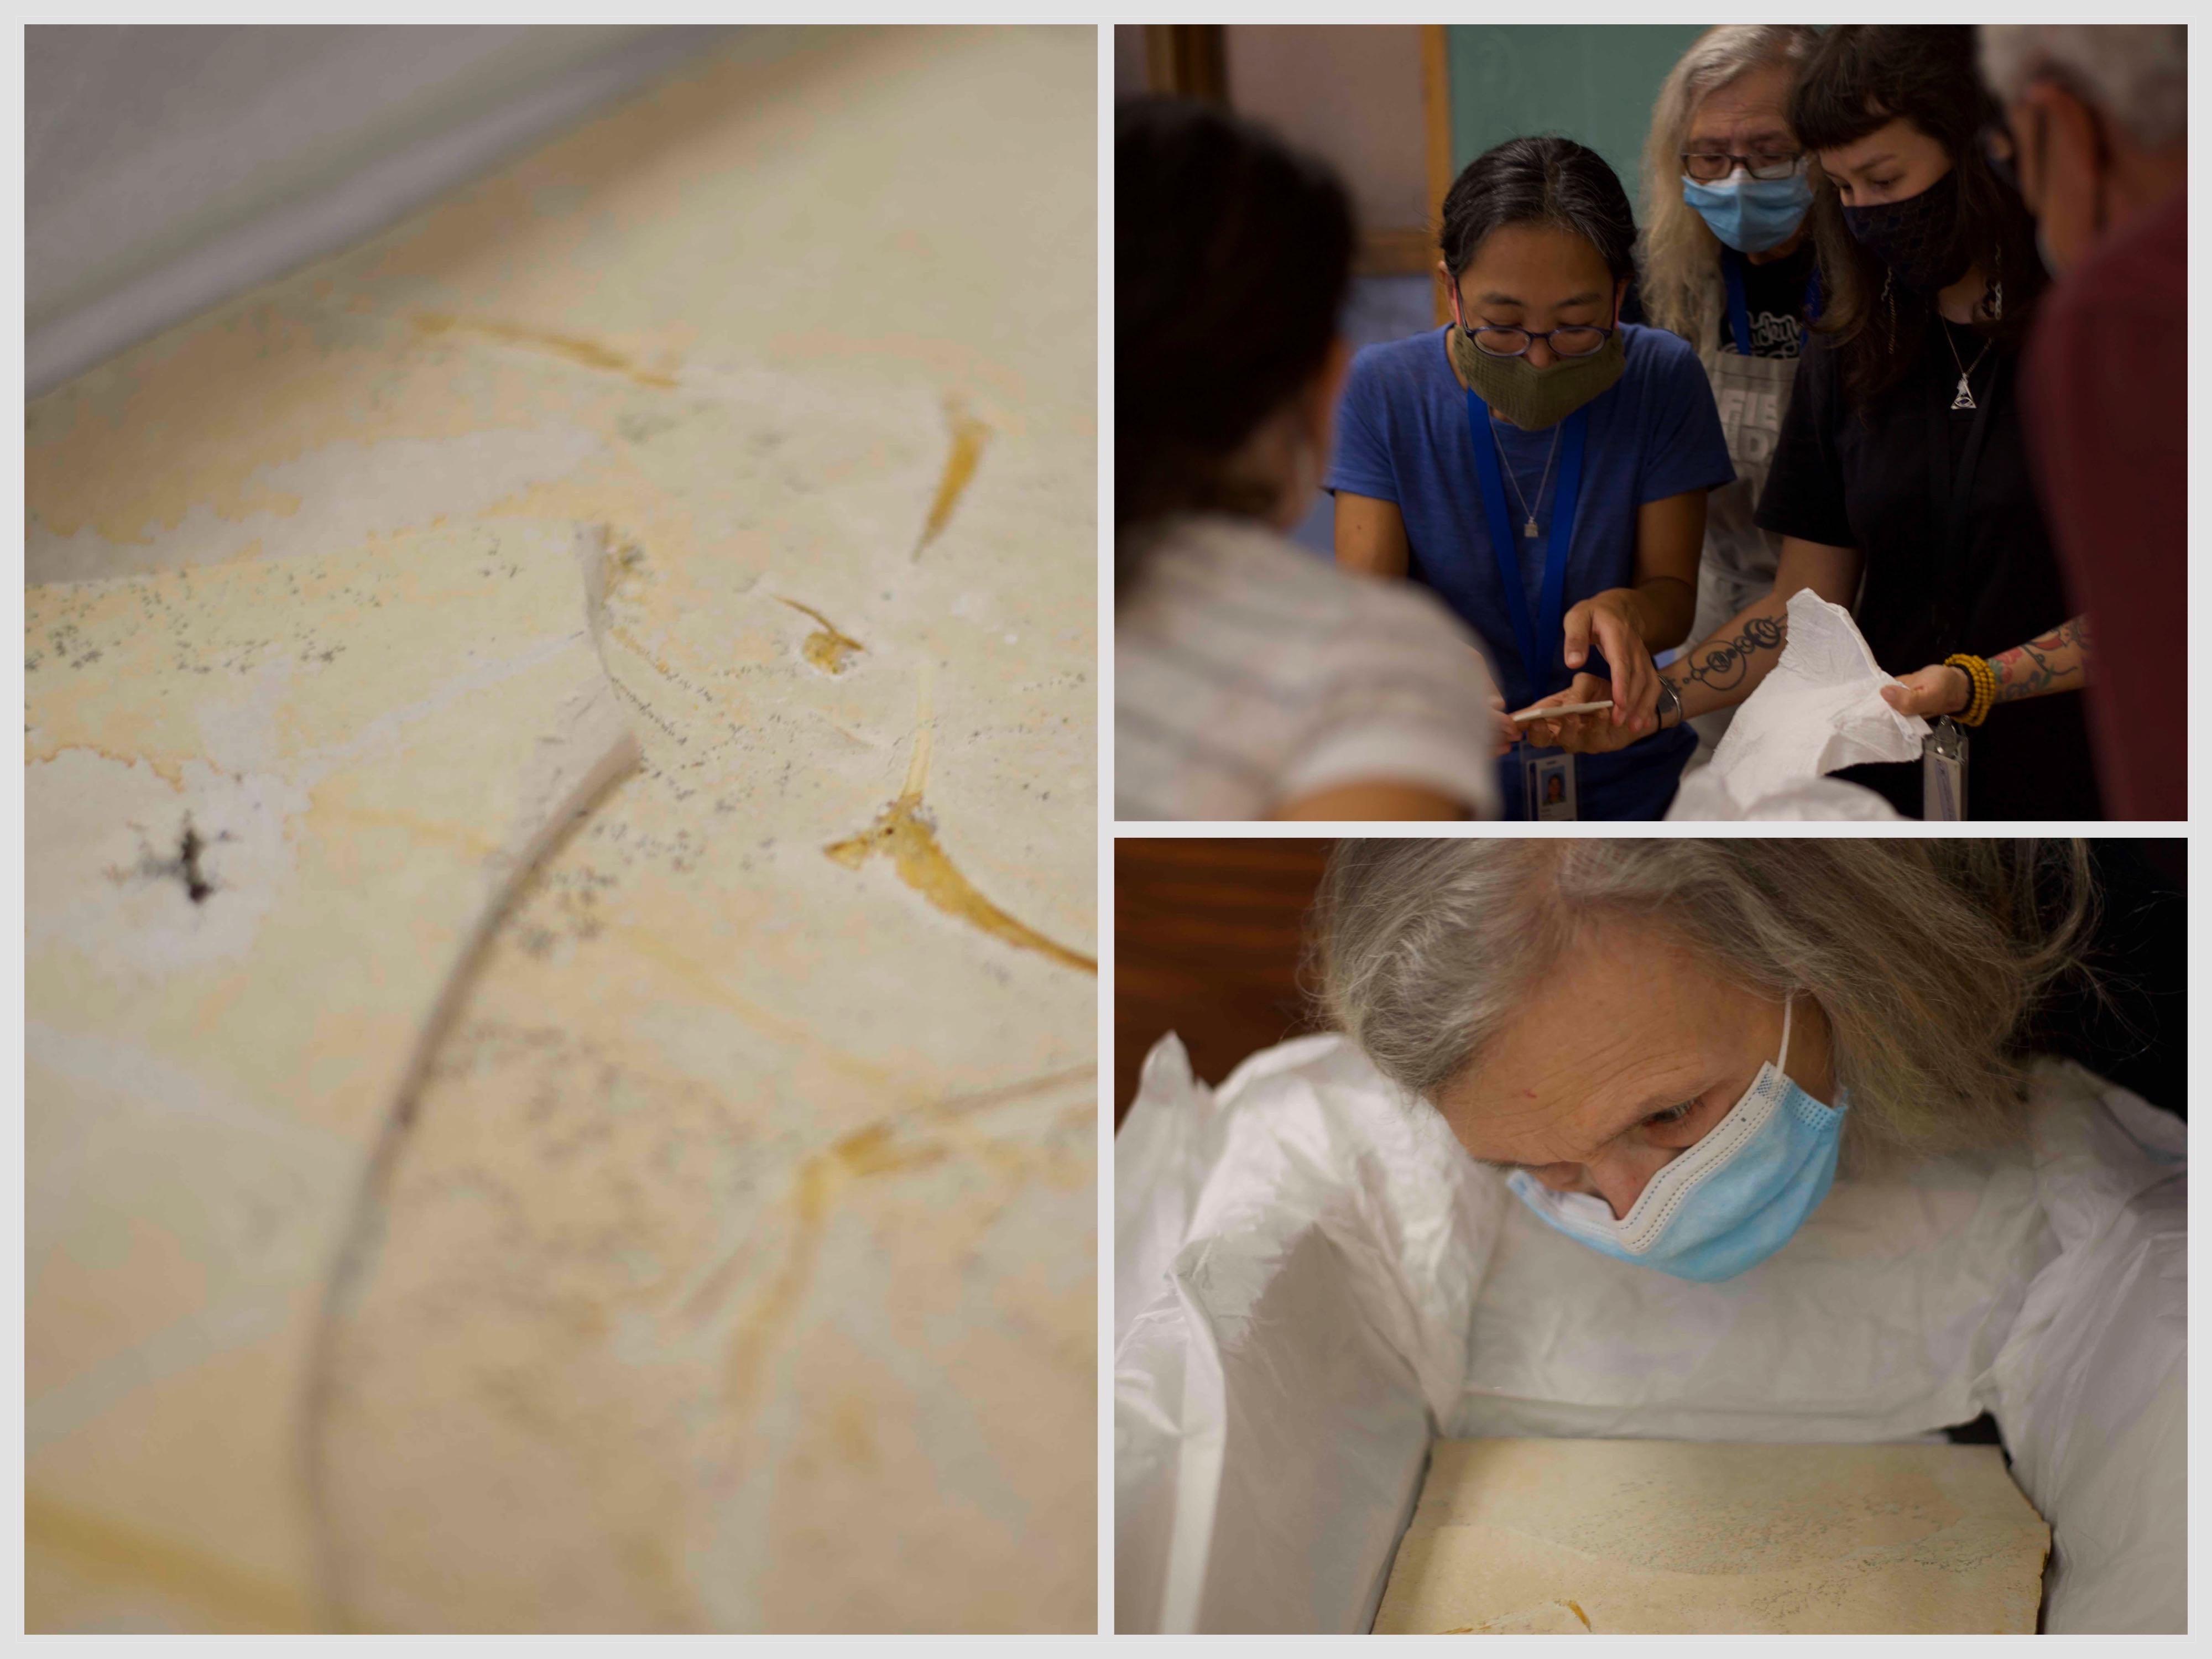 The unprepared Archaeopteryx fossil, from left; Akiko Shinya and Connie Van Beek get their first glimpse of fragments with Jingmai O'Connor; Connie Van Beek takes a closer look at the just-arrived specimen in August 2022. (Courtesy of the Field Museum of Natural History)